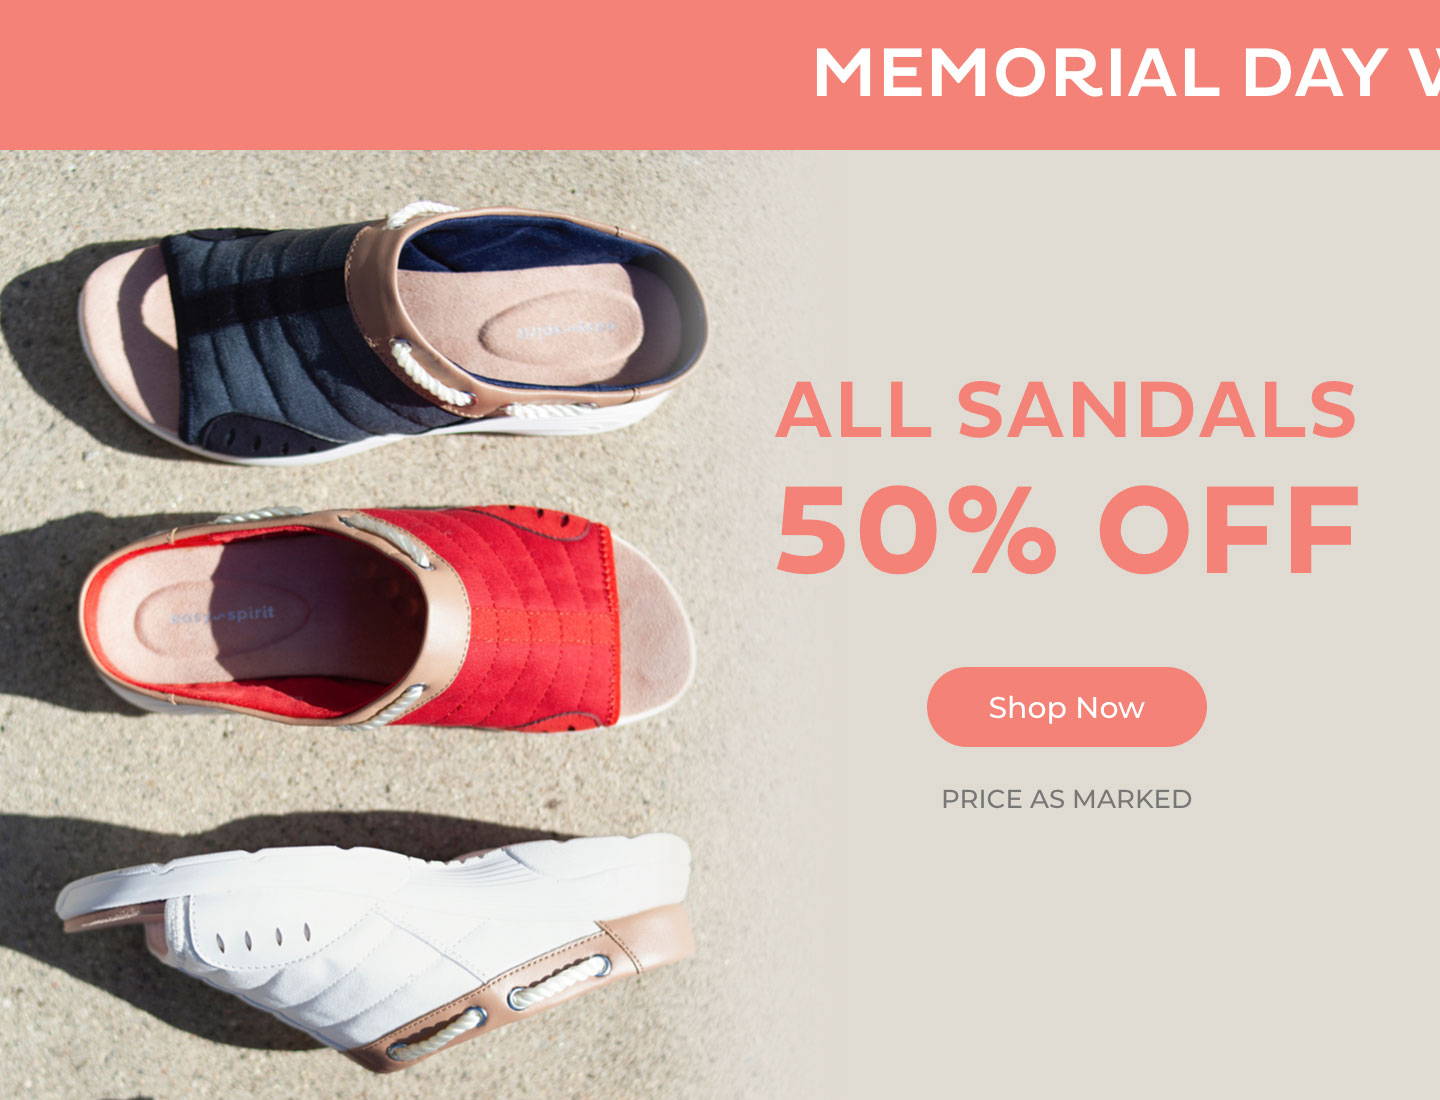 All Sandals 50% Off